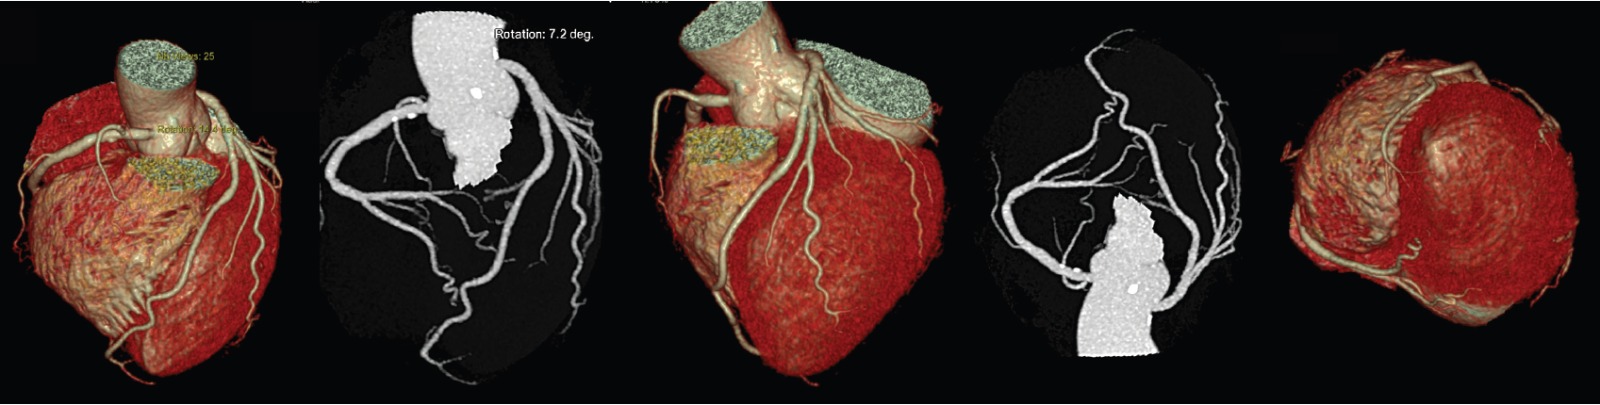 heart and blood vessels mri scan